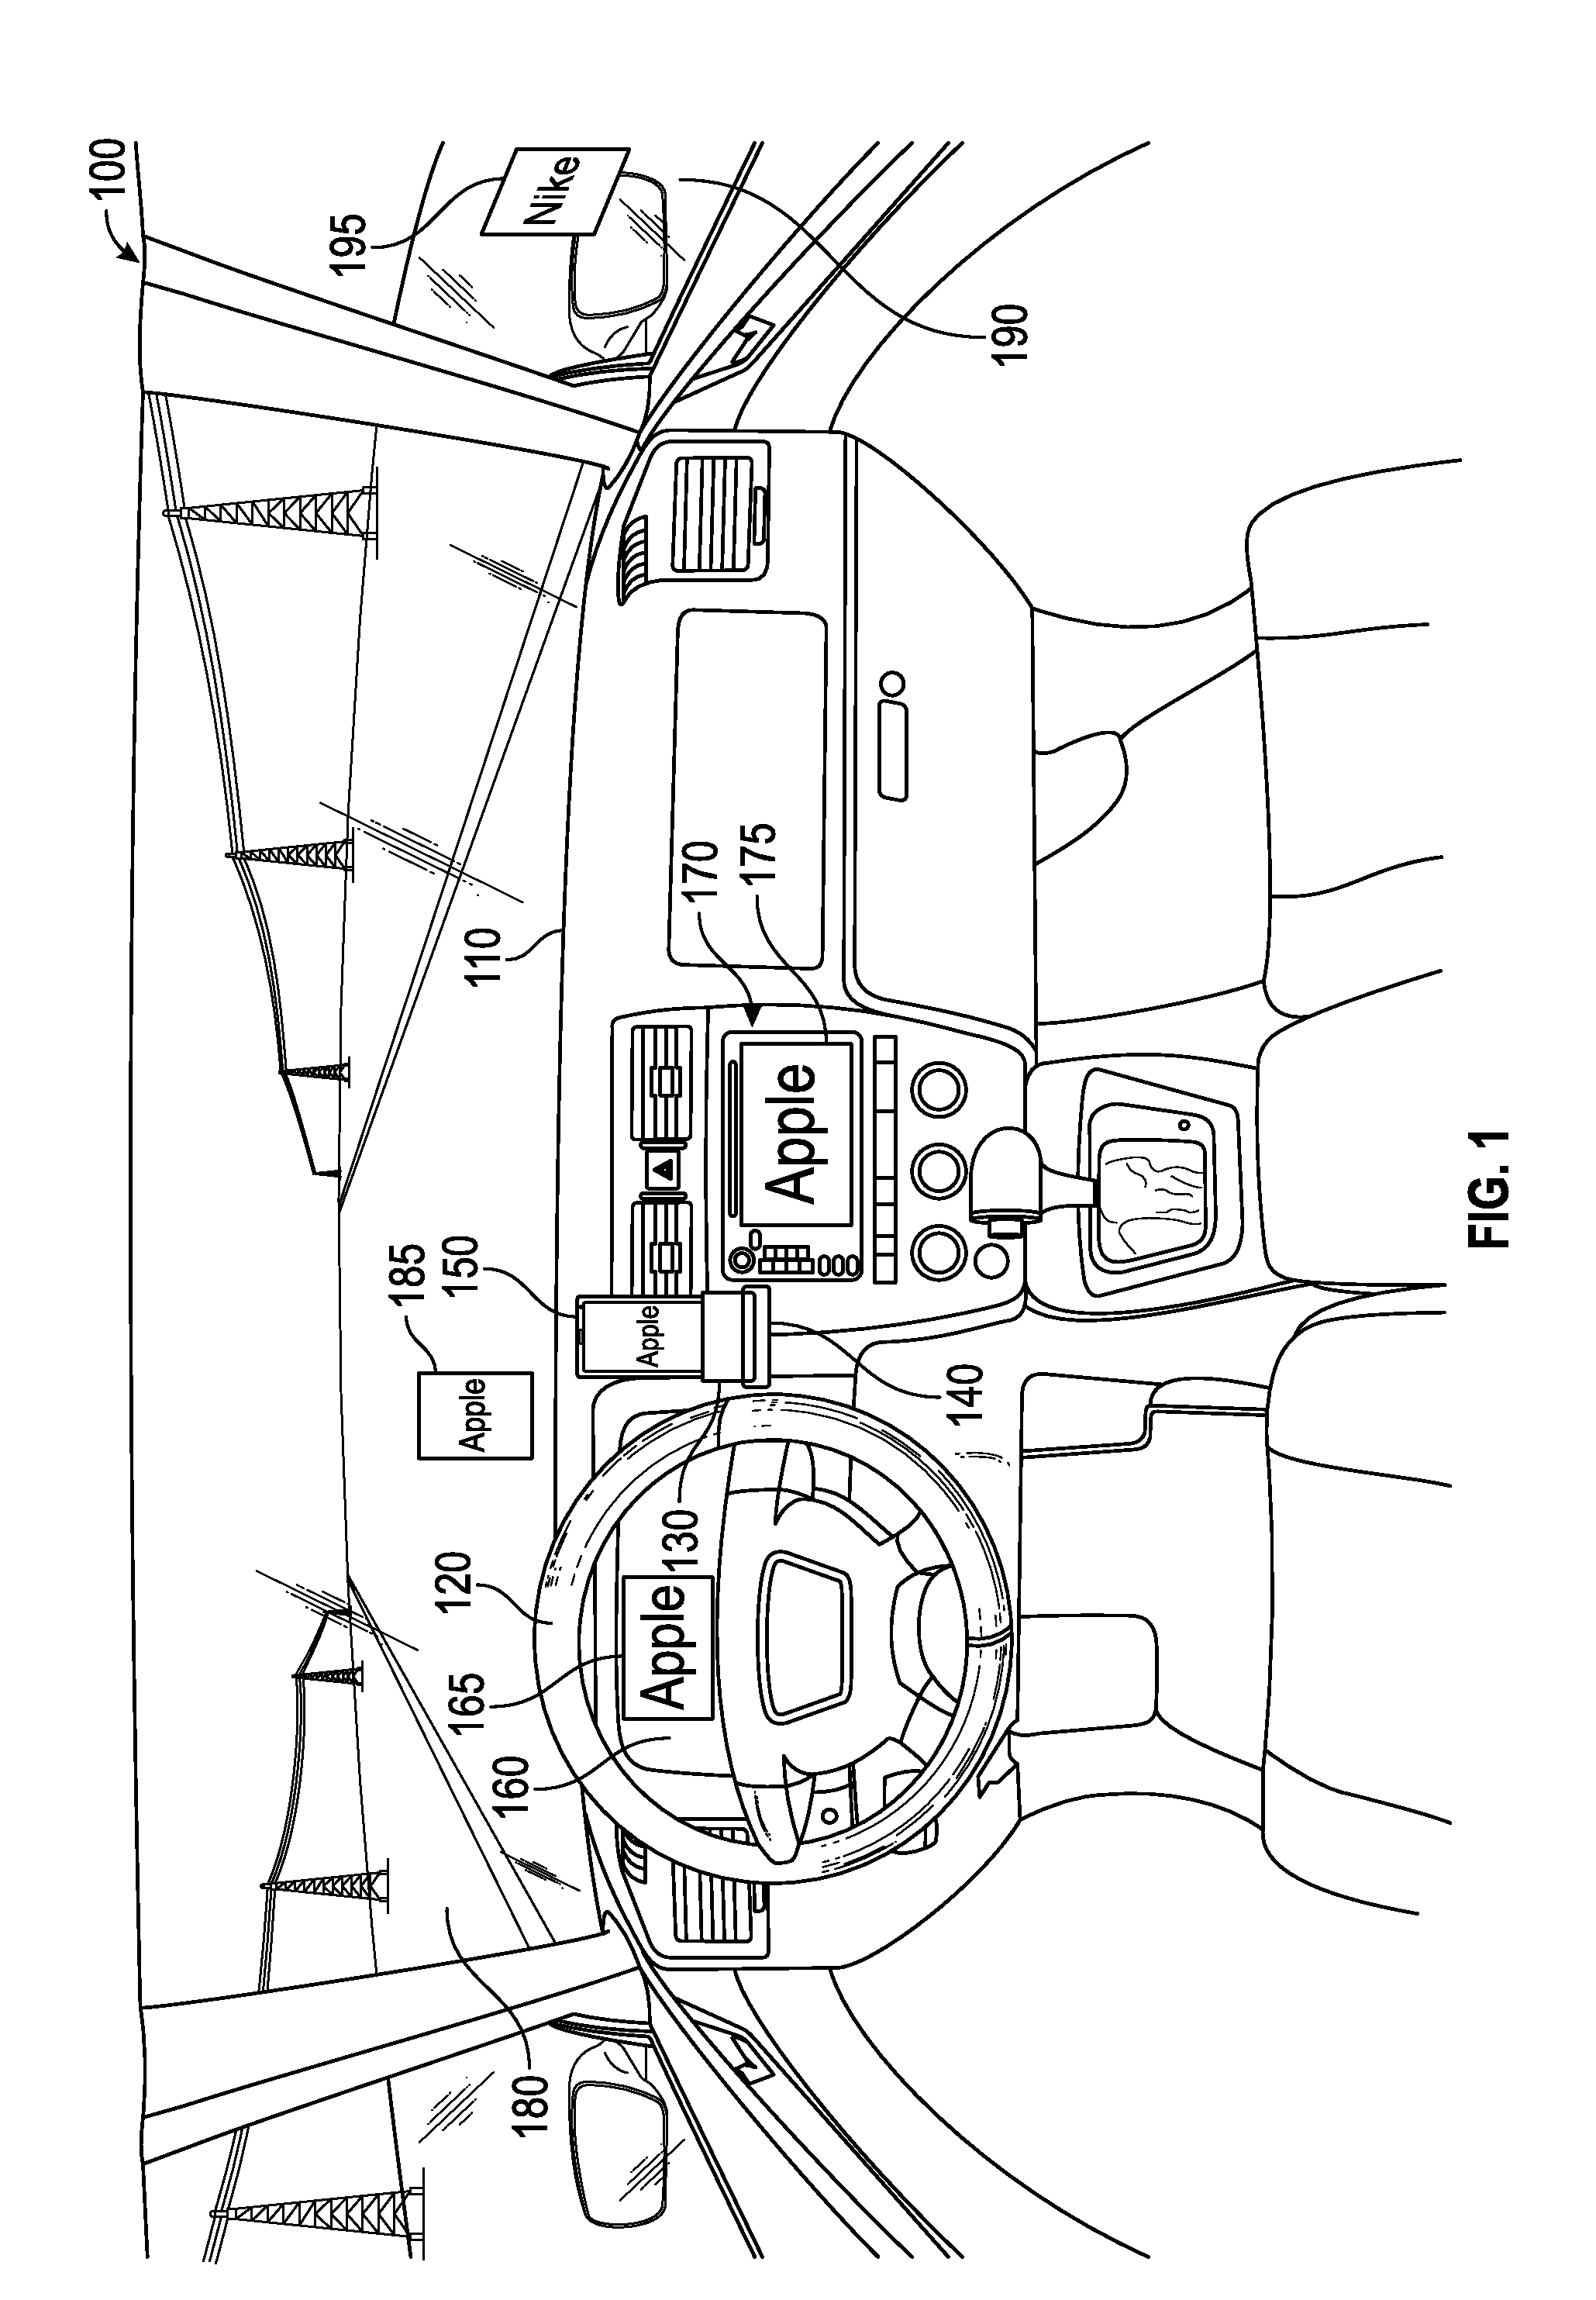 Automobile adaptor system, apparatus and methodology